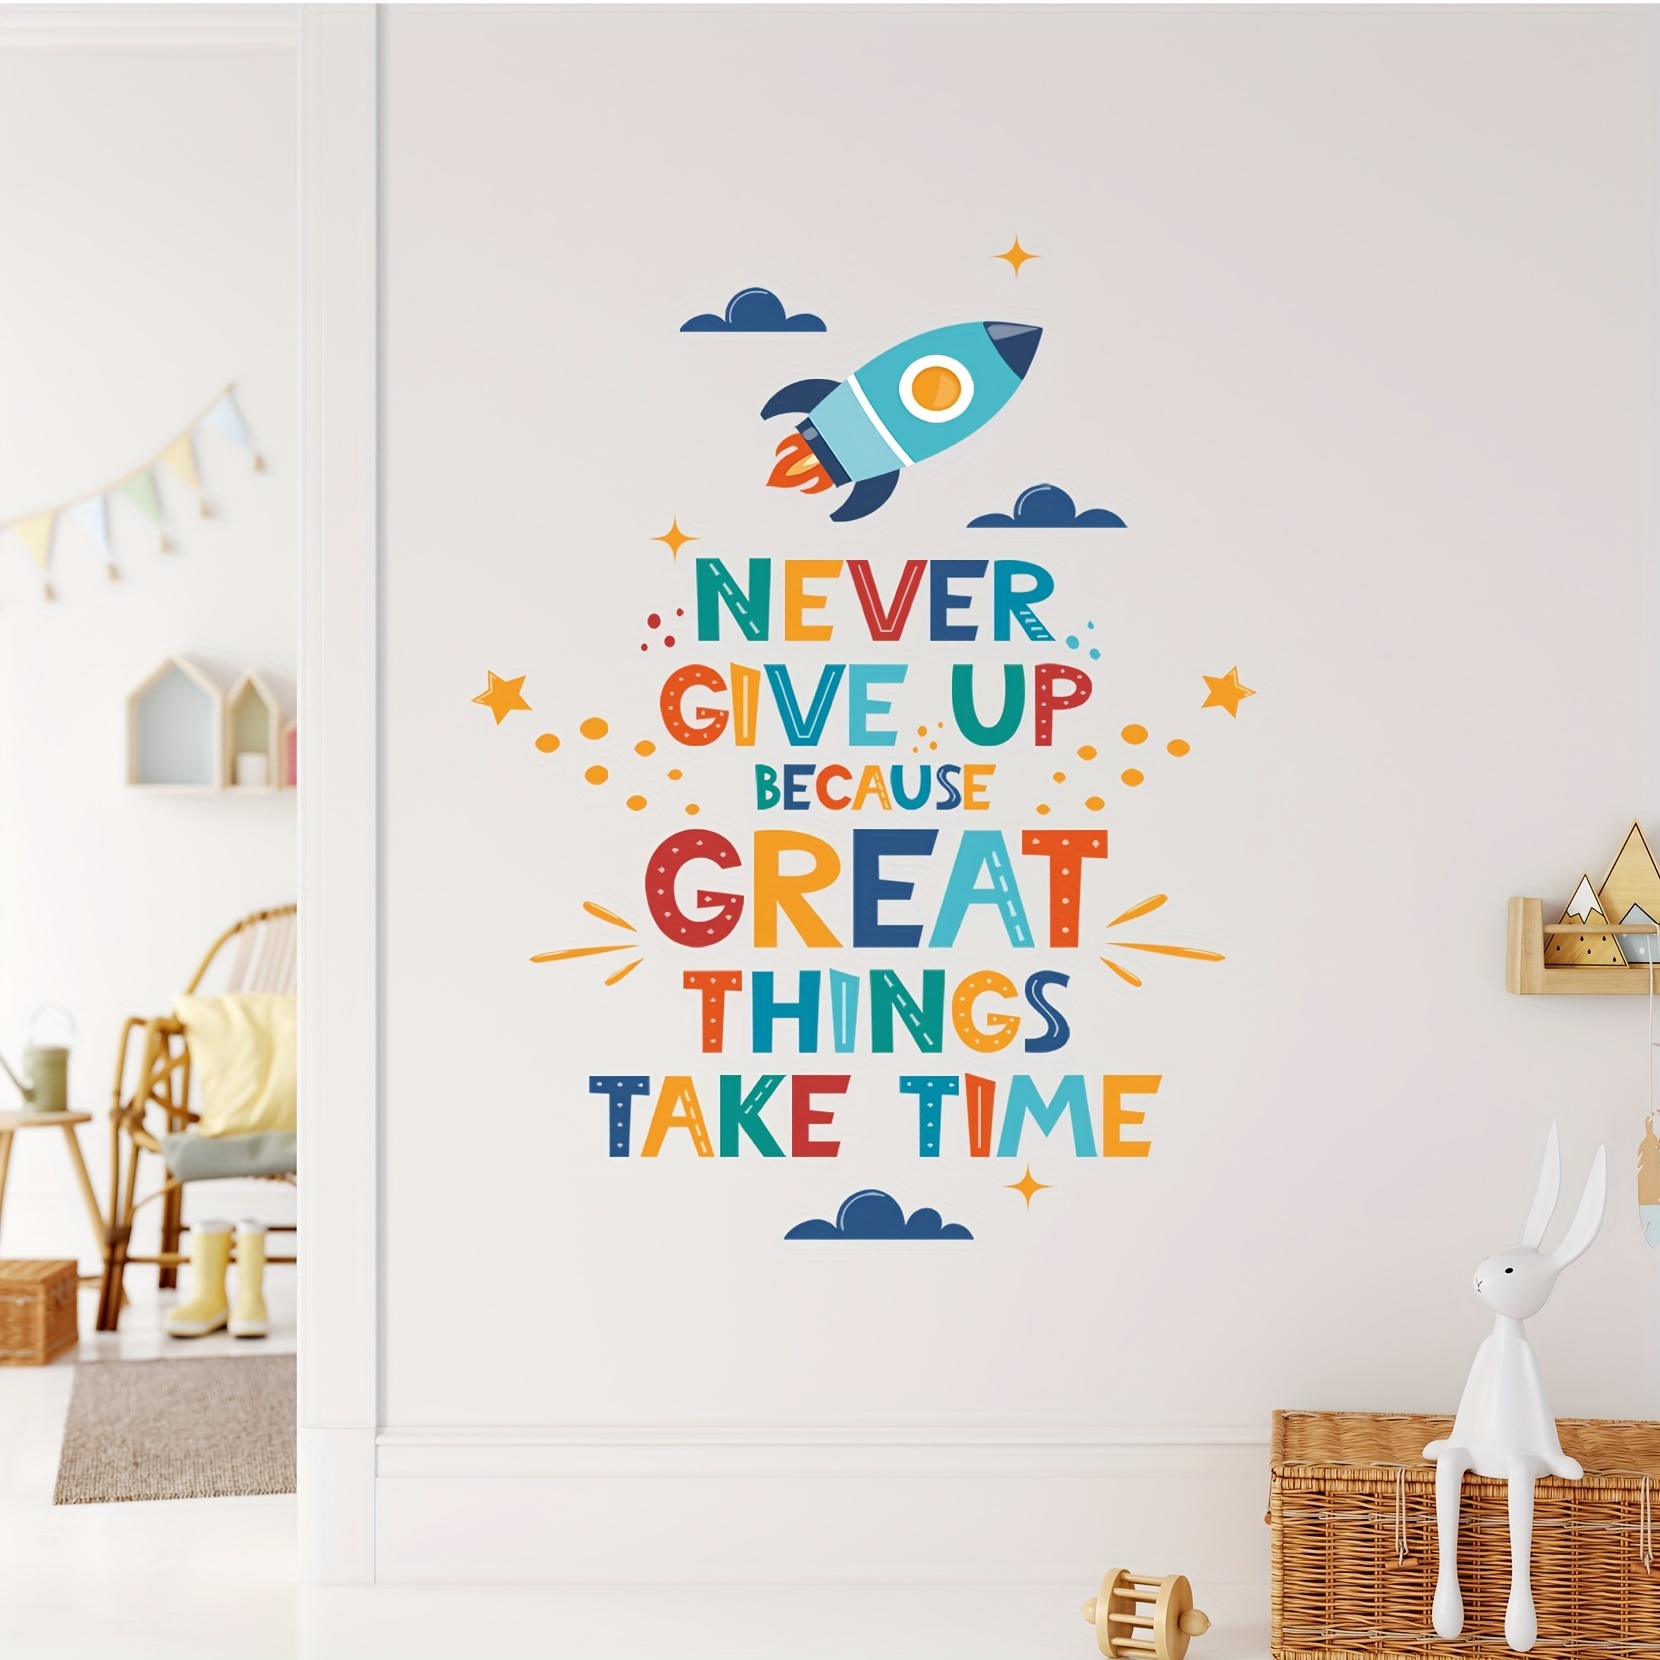 

Inspirational Quotes Decals Peel And Stick Motivational Wall Decals Never Give Up Wall Decals For Bedroom Living Room Office Store Shopcase Decor Bathroom Vinyl Wall Quotes Stickers